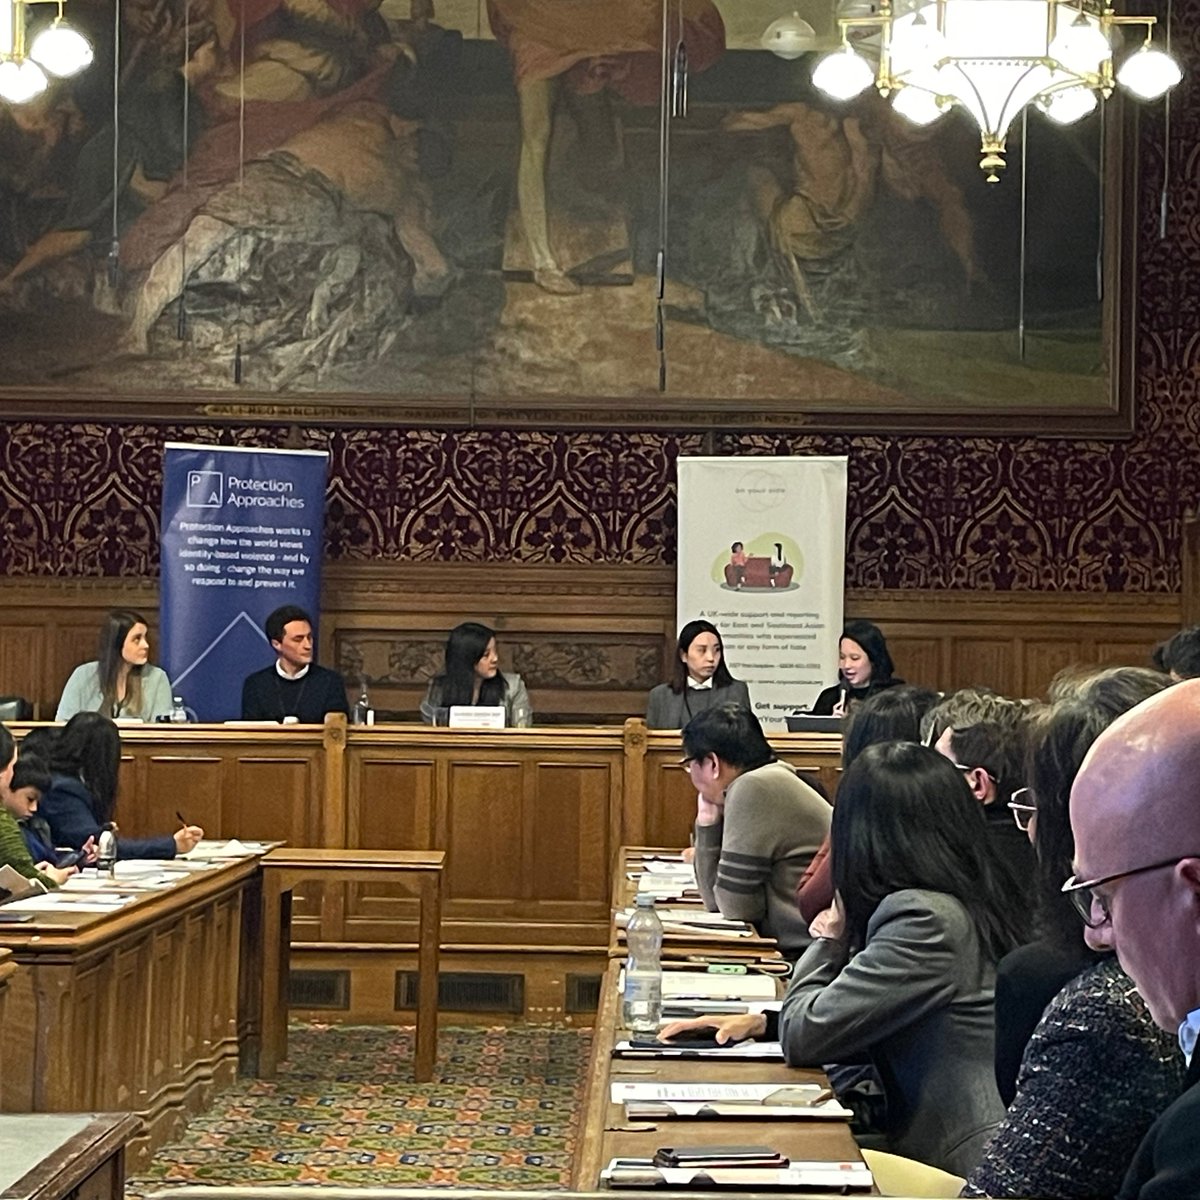 'The immigration system today puts people in a position where they feel like they have no choice and must keep quiet about issues they face' Director of @SEEAC_CIC, @mariko_hys on the barriers faced by the ESEA migrant communities & the importance of 3rd party reporting services